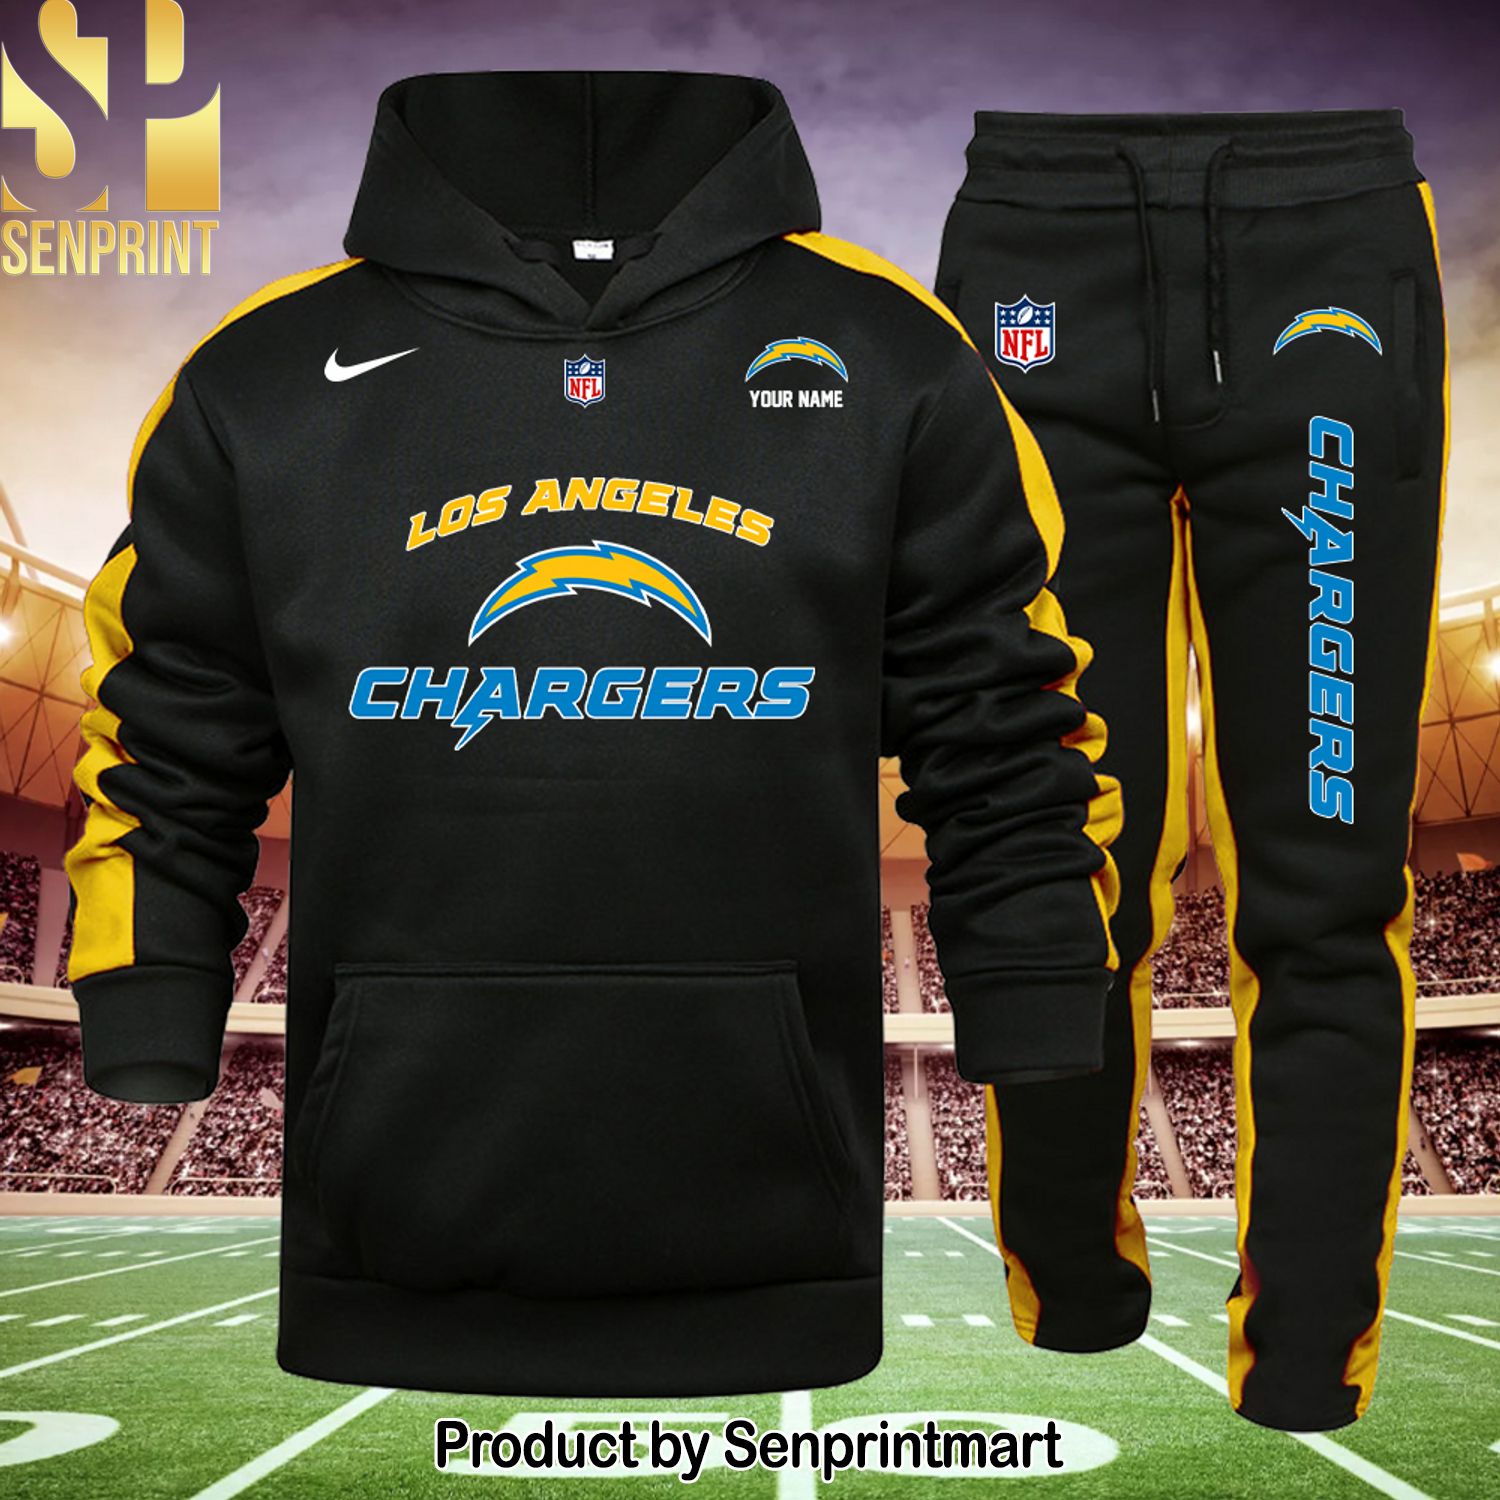 NFL Los Angeles Chargers Full Print 3D Shirt and Sweatpants